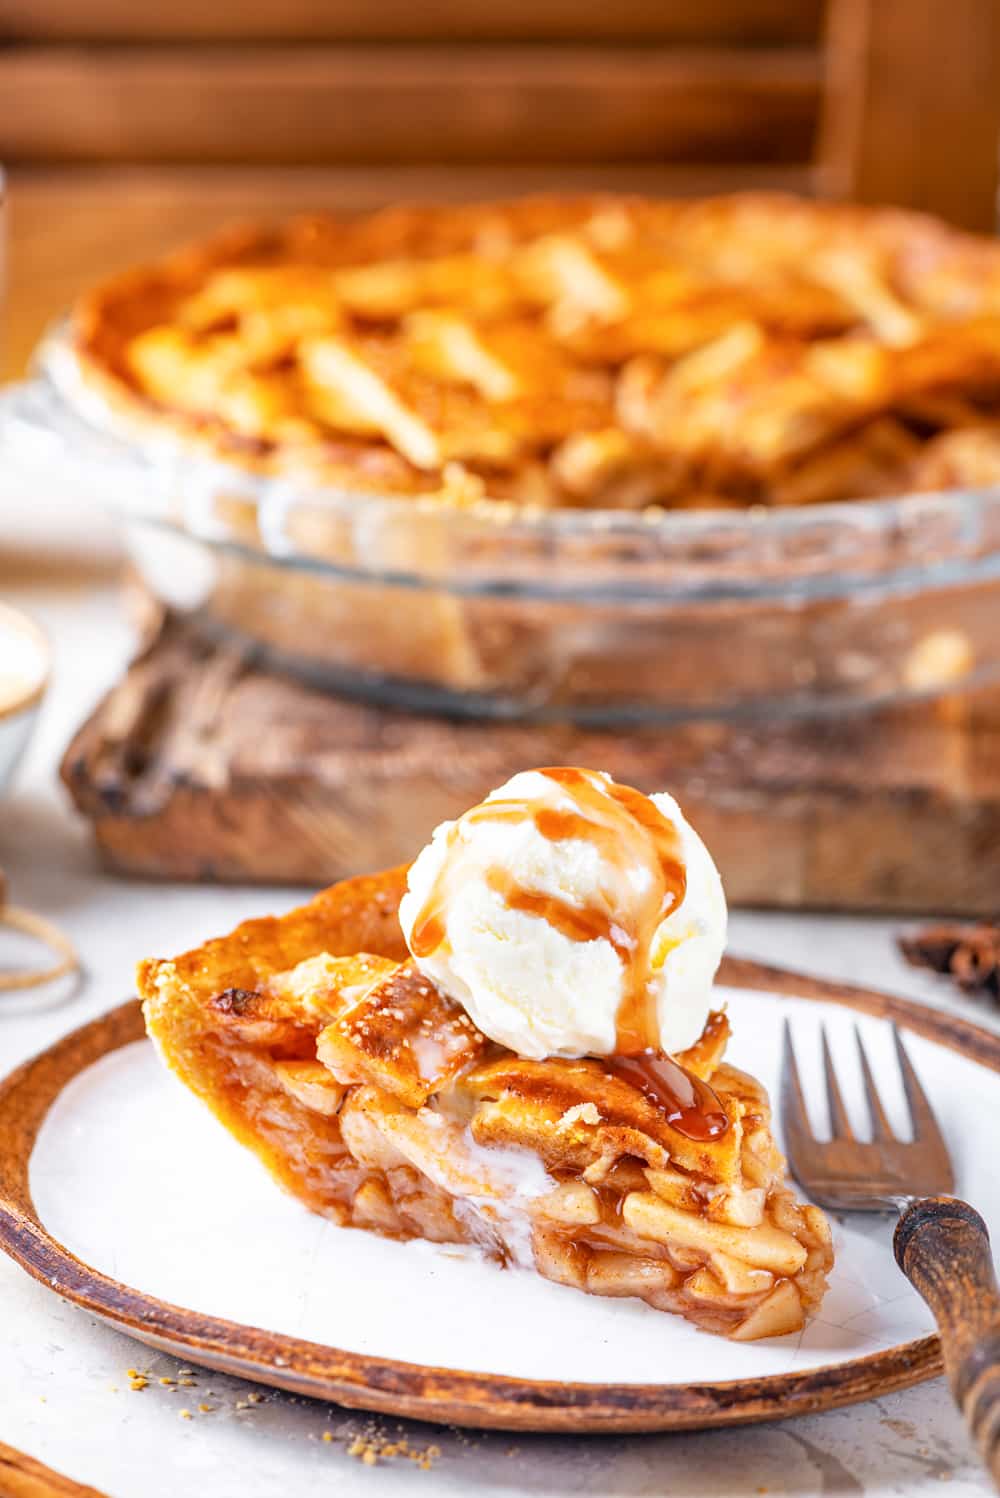 A piece of vegan apple pie with a scoop of vegan vanilla ice cream on top of the piece with a caramel sauce drizzled on the ice cream. There is a fork on the plate to the right of the pie piece. An entire vegan apple pie minus the piece on the plate is behind the plate in glass pie dish on a wooden cutting board. Everything is on a white counter.